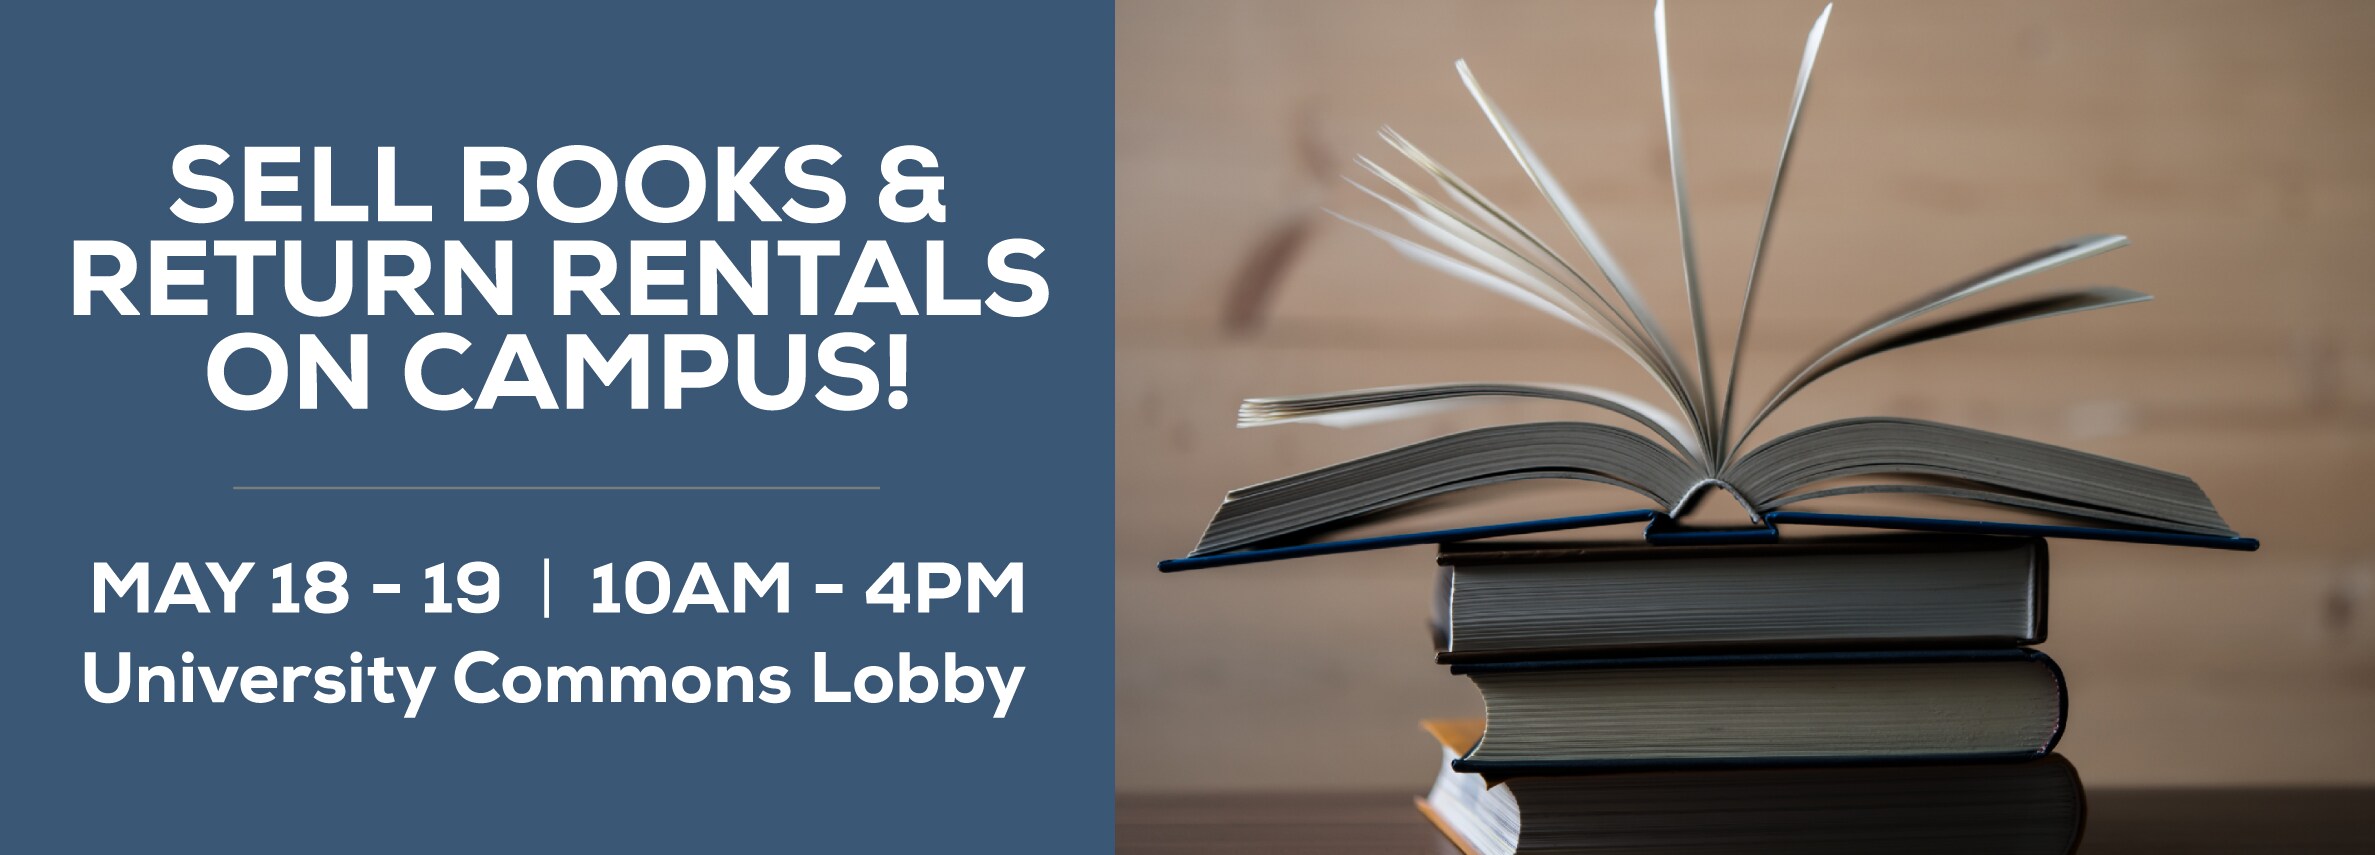 Sell your books and return your rentals! University commons lobby. May 18 - 19 10am - 4pm. Free shipping on all buybacks and rental returns! Sell and retrun now